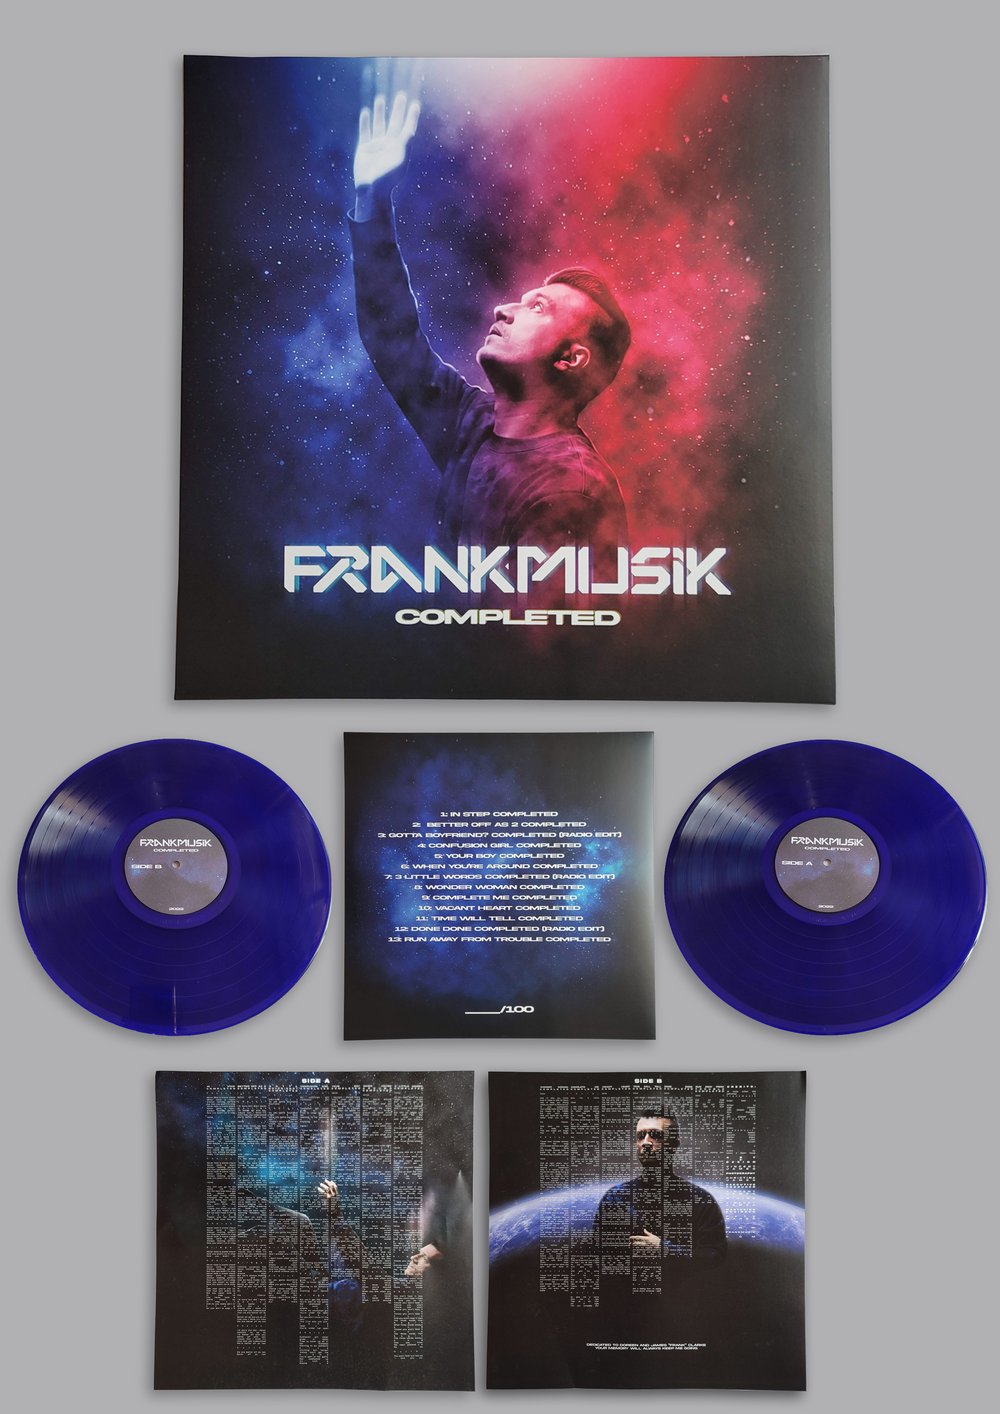 Frankmusik Limited Edition Completed 12” Vinyl 100 Numbered Copies